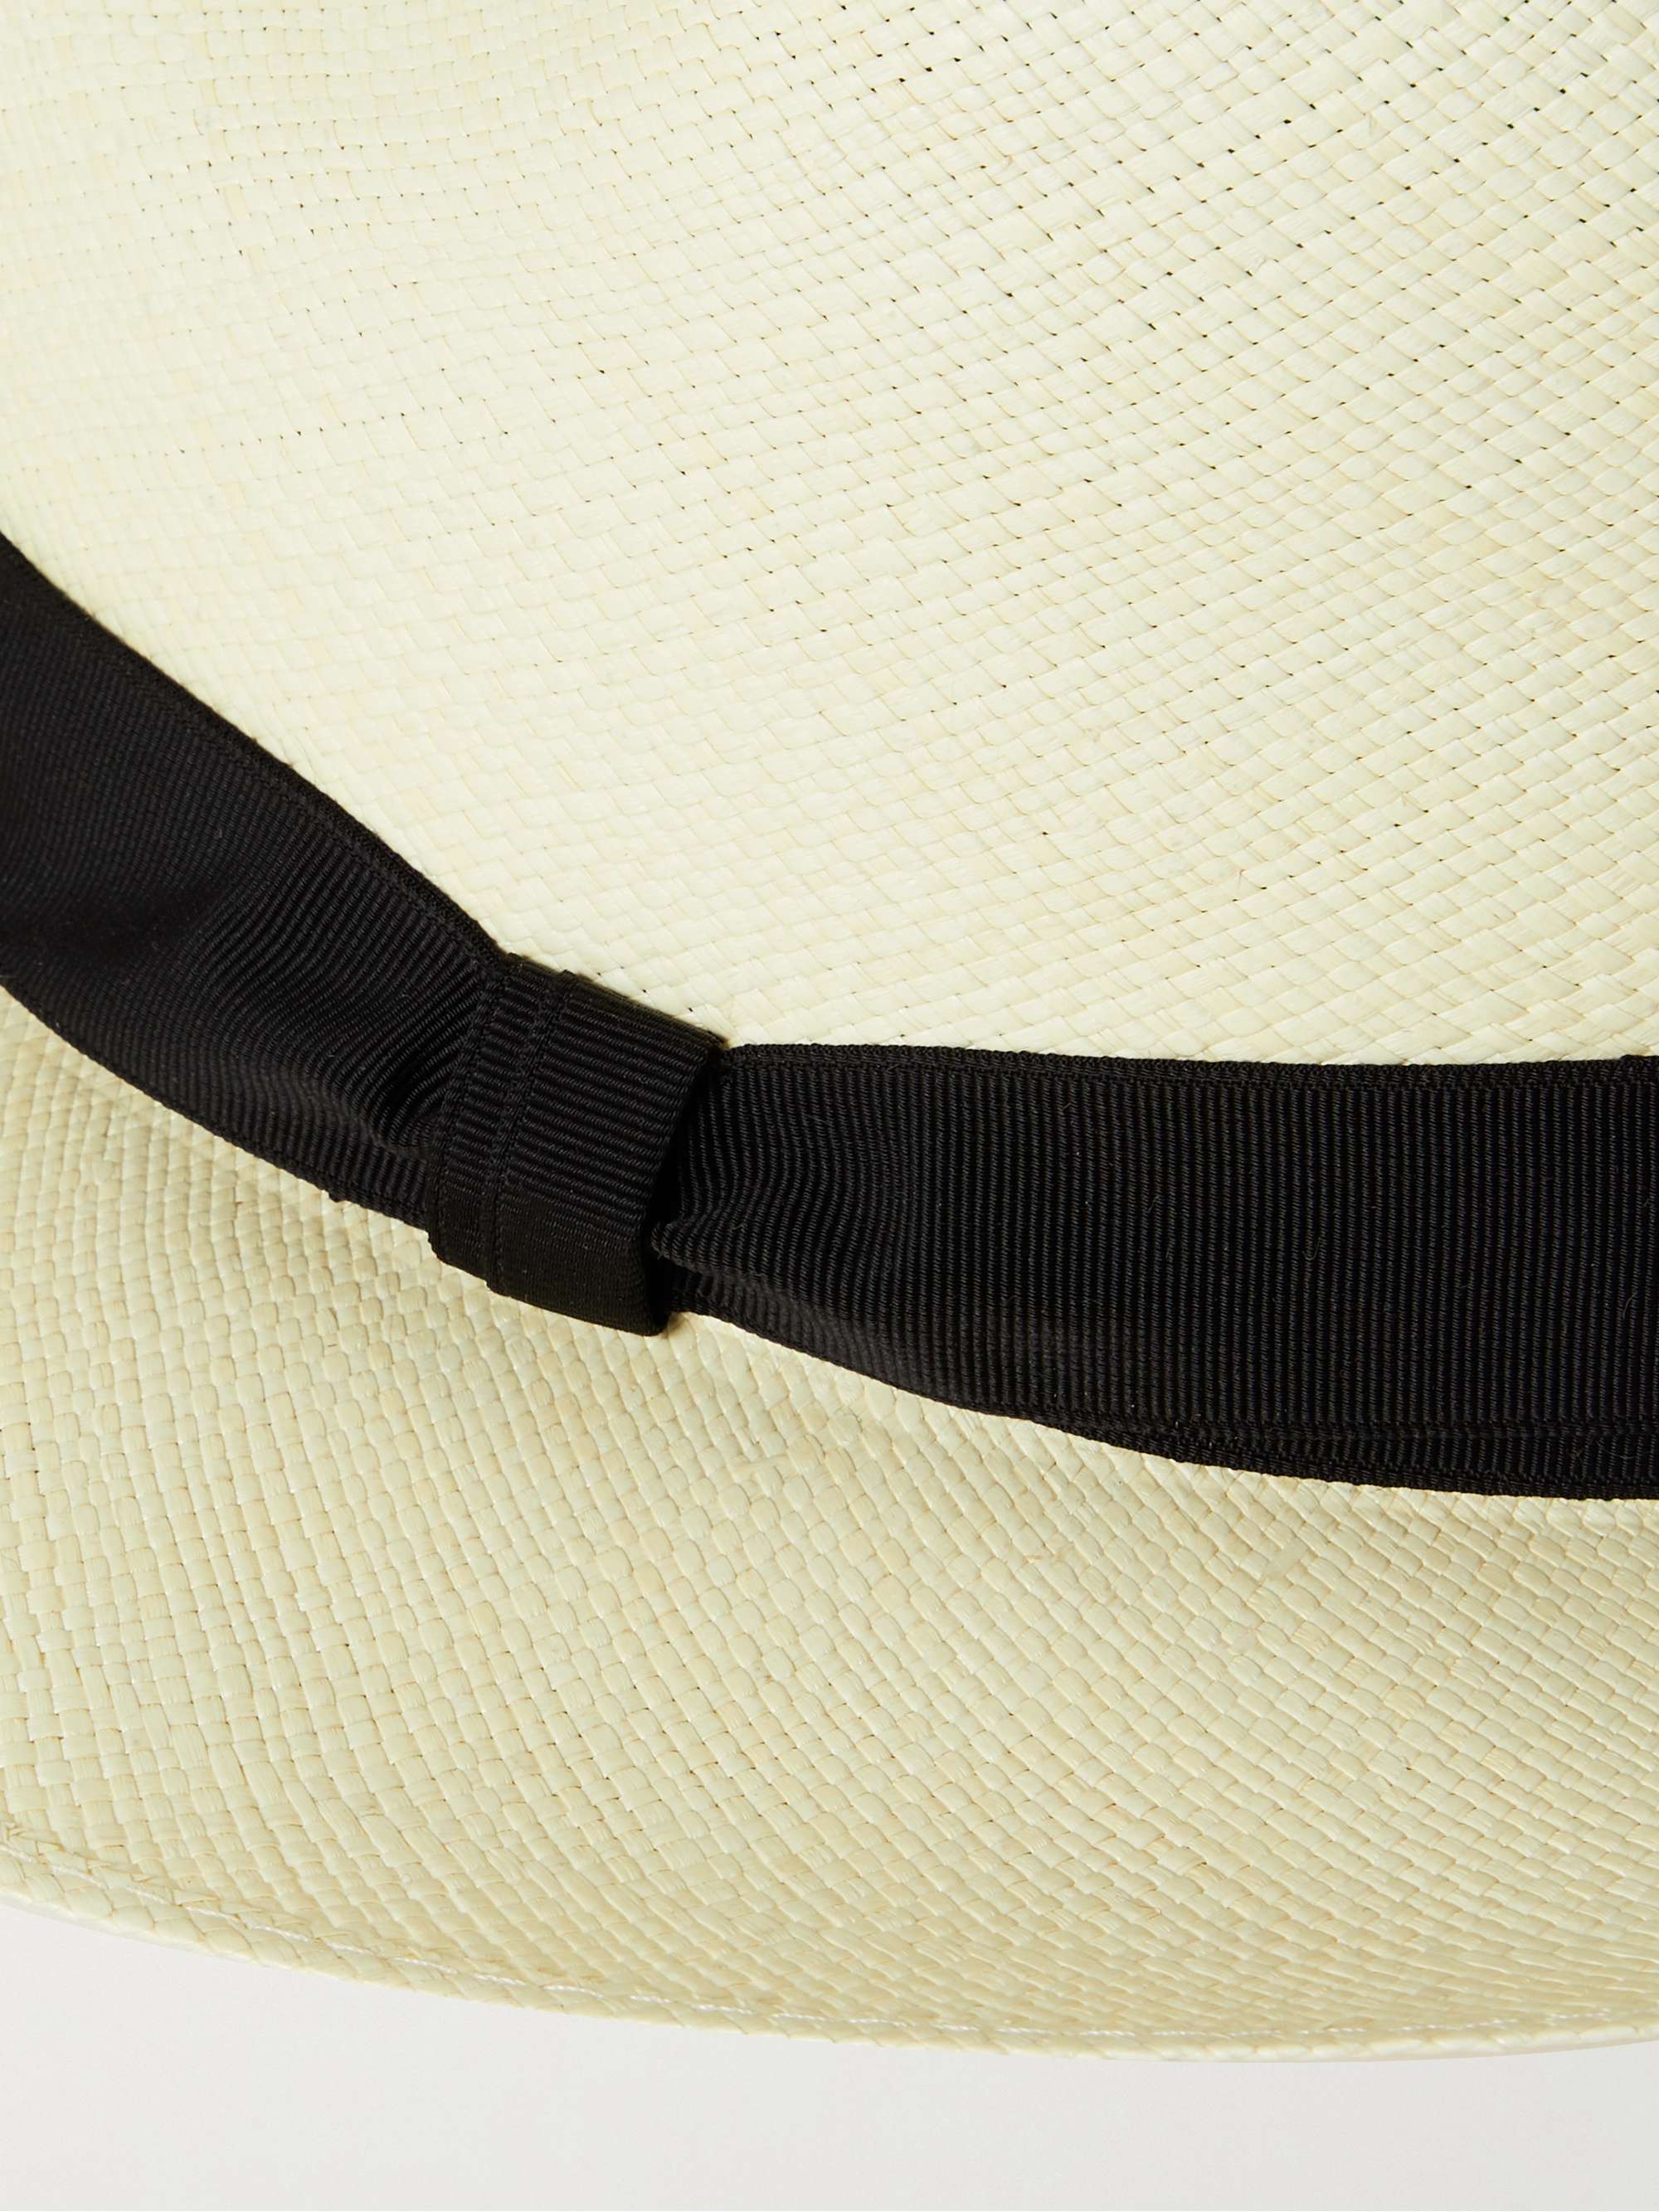 ANDERSON & SHEPPARD Grosgrain-Trimmed Straw Trilby Hat